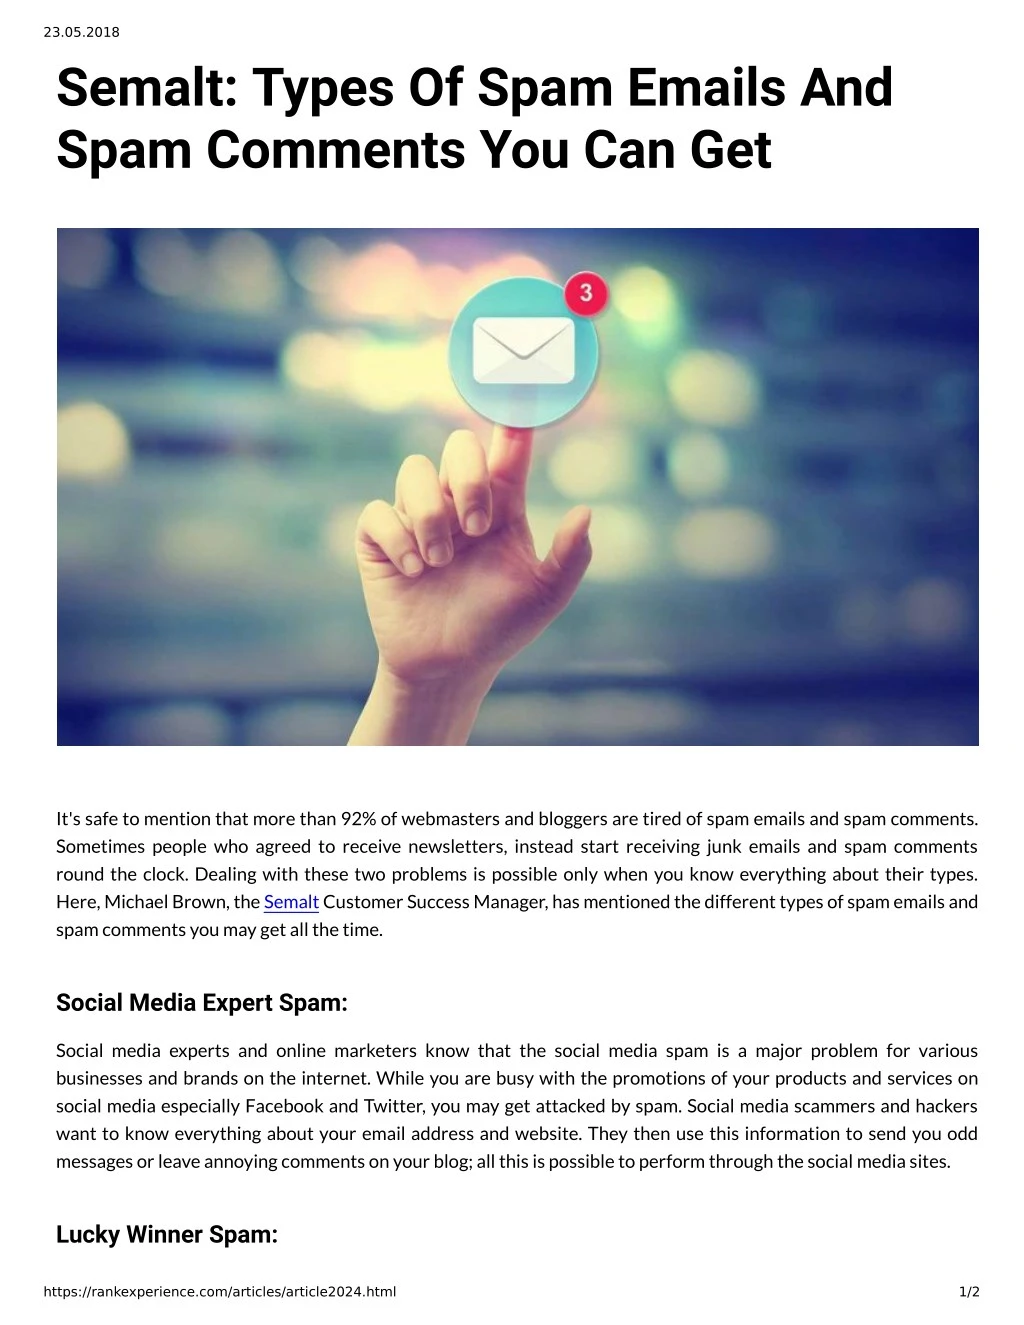 23 05 2018 semalt types of spam emails and spam